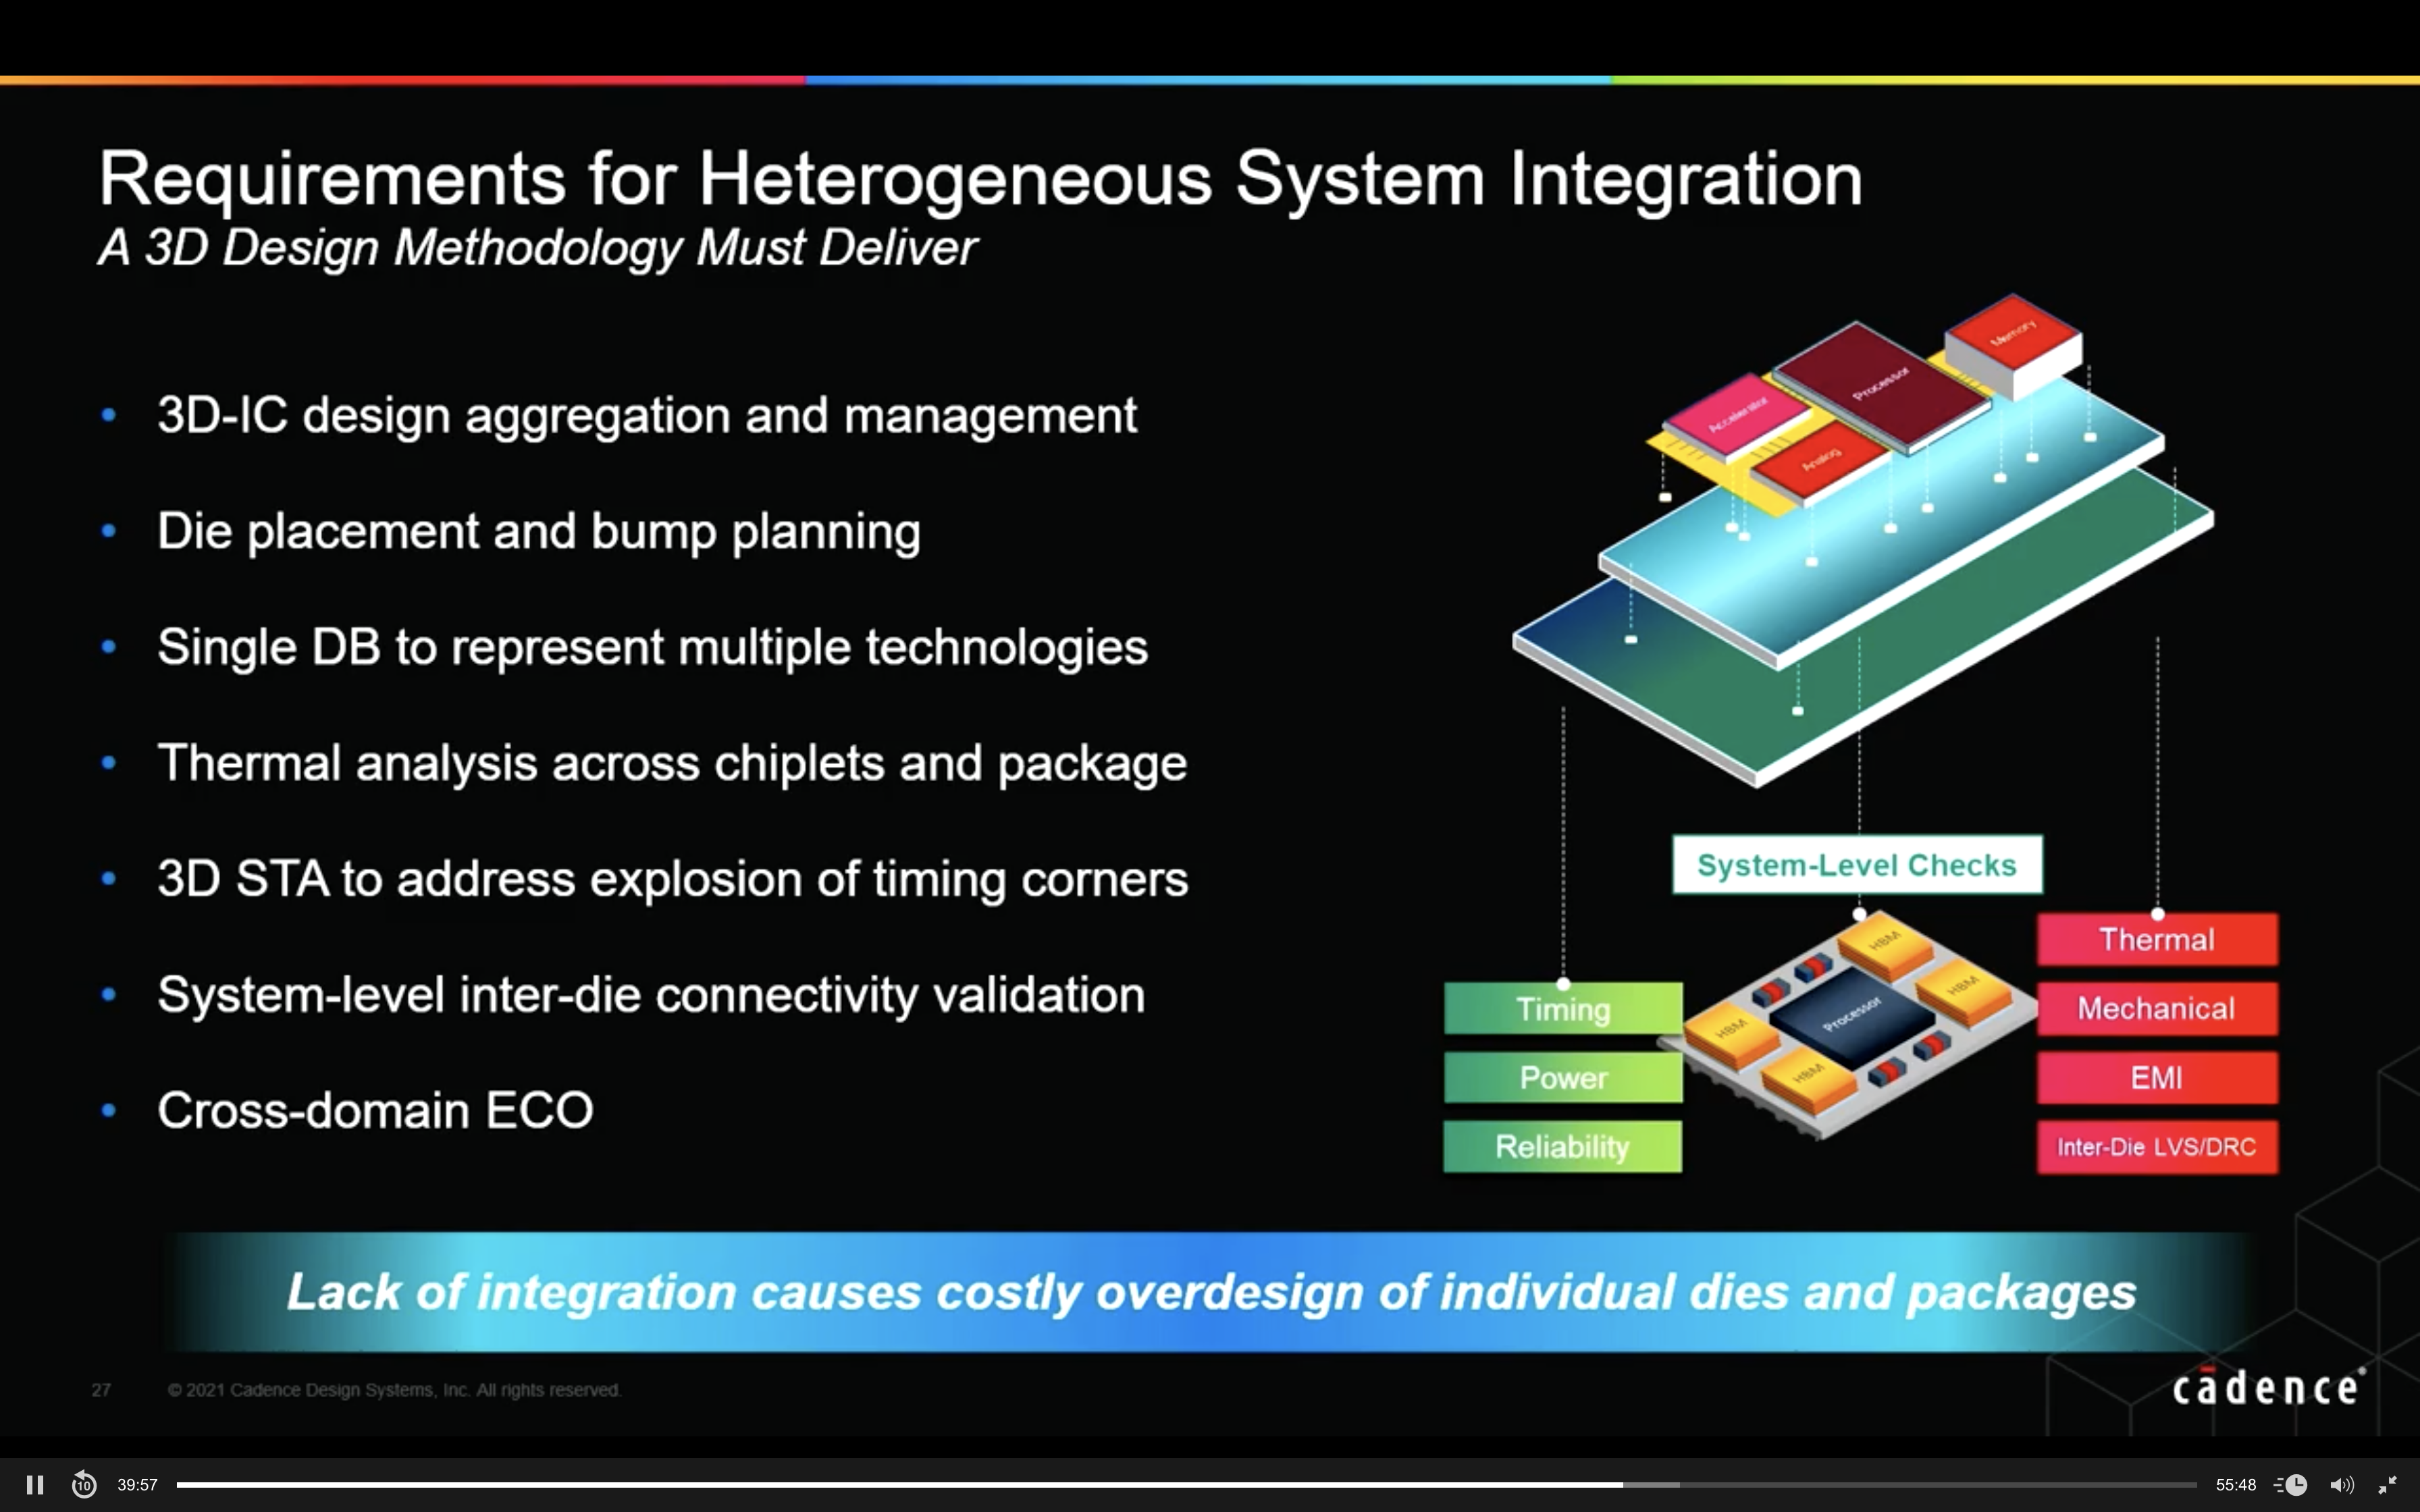 Requirements for Heterogeneous System Integration